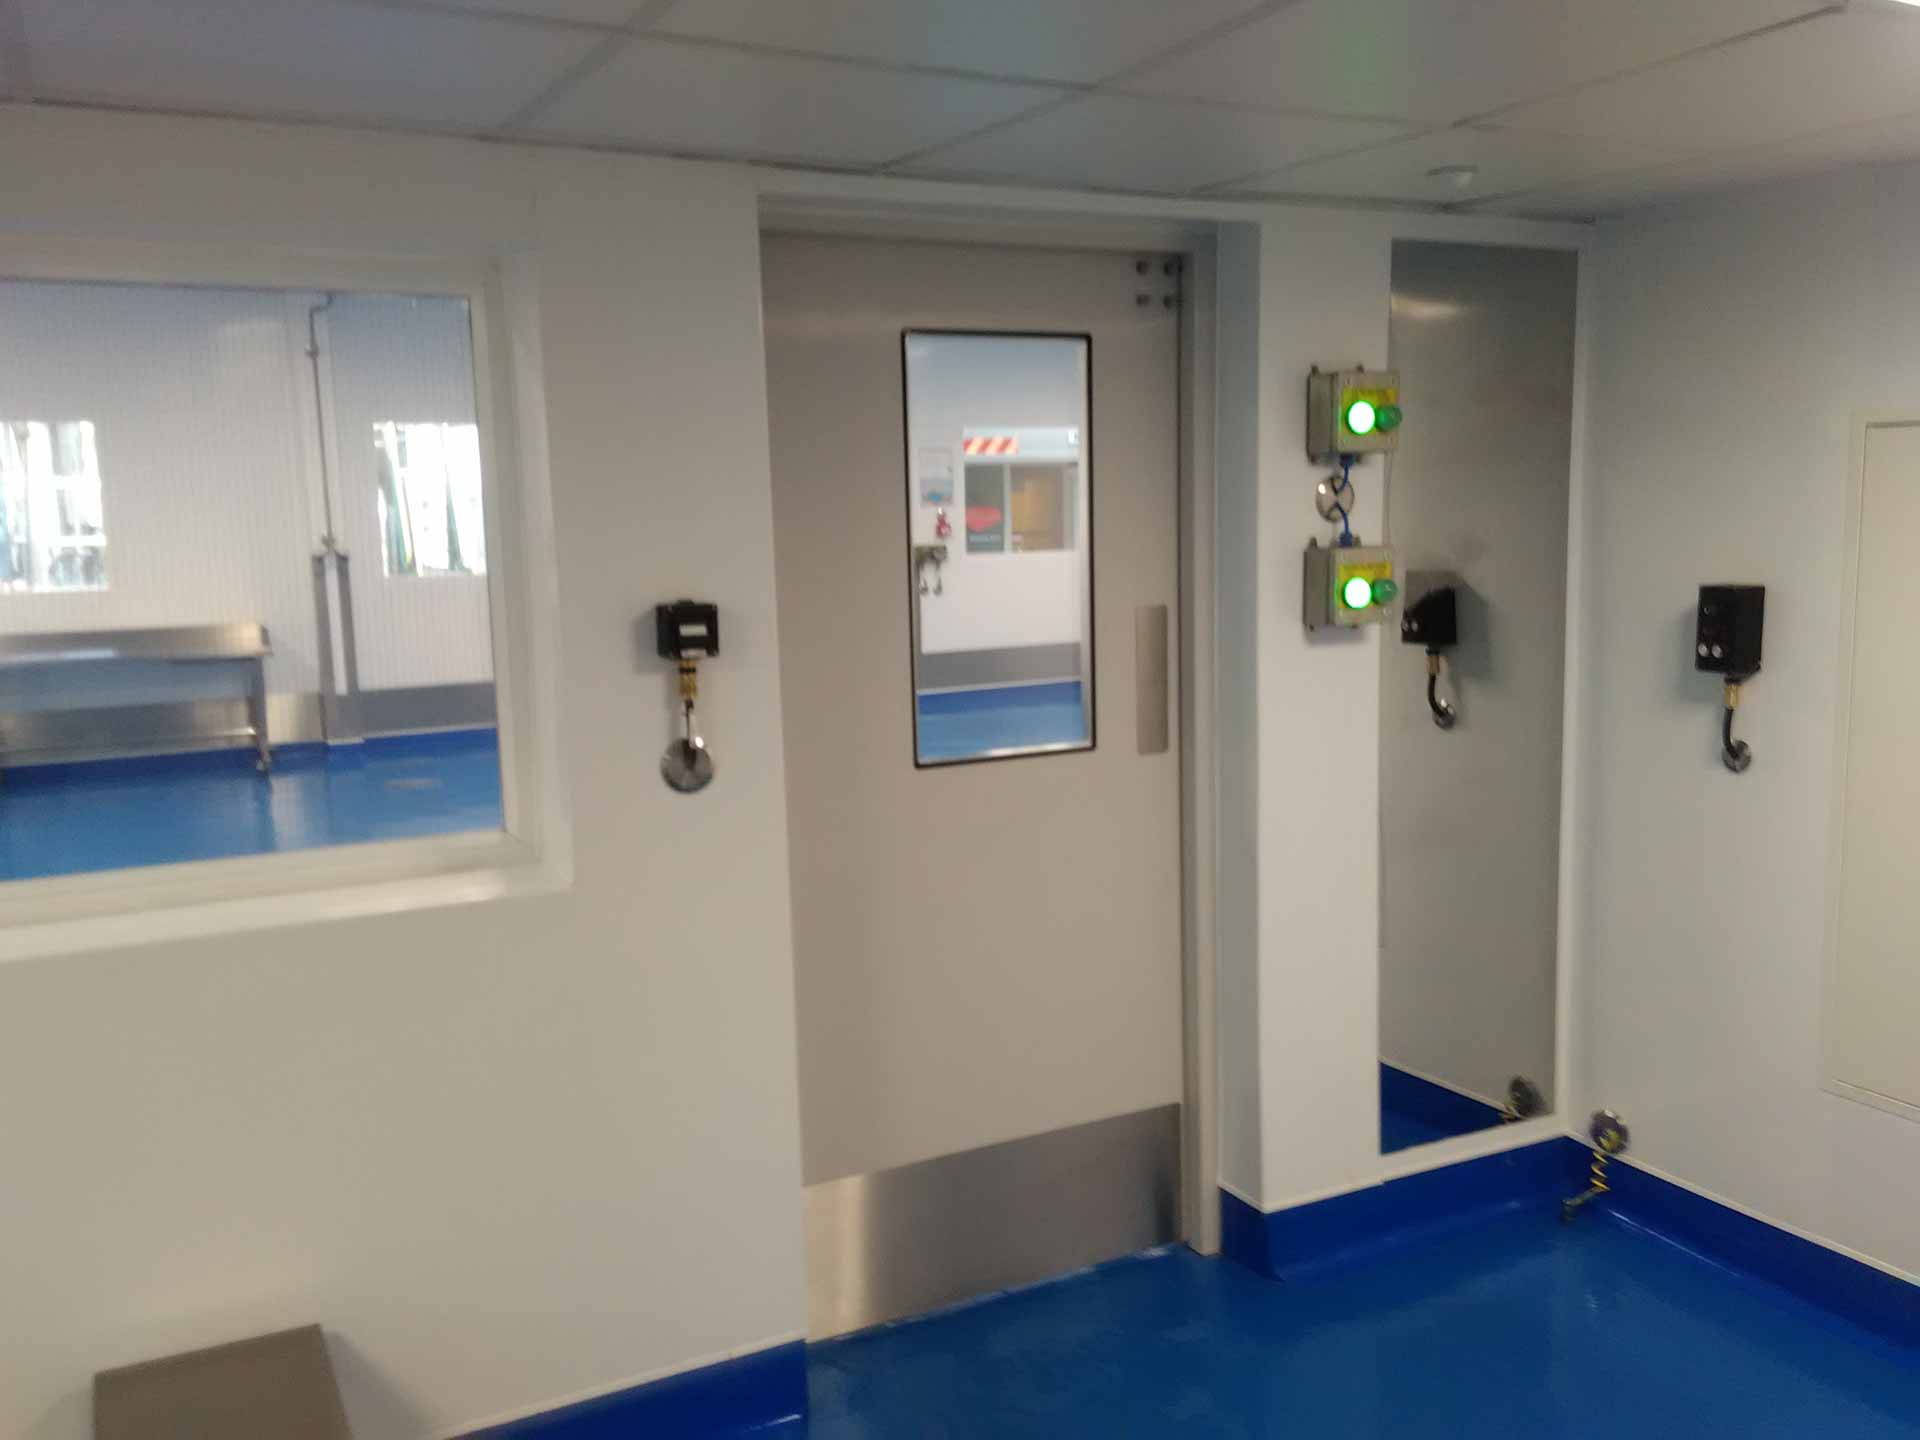 Fully installed access control system in an industrial home